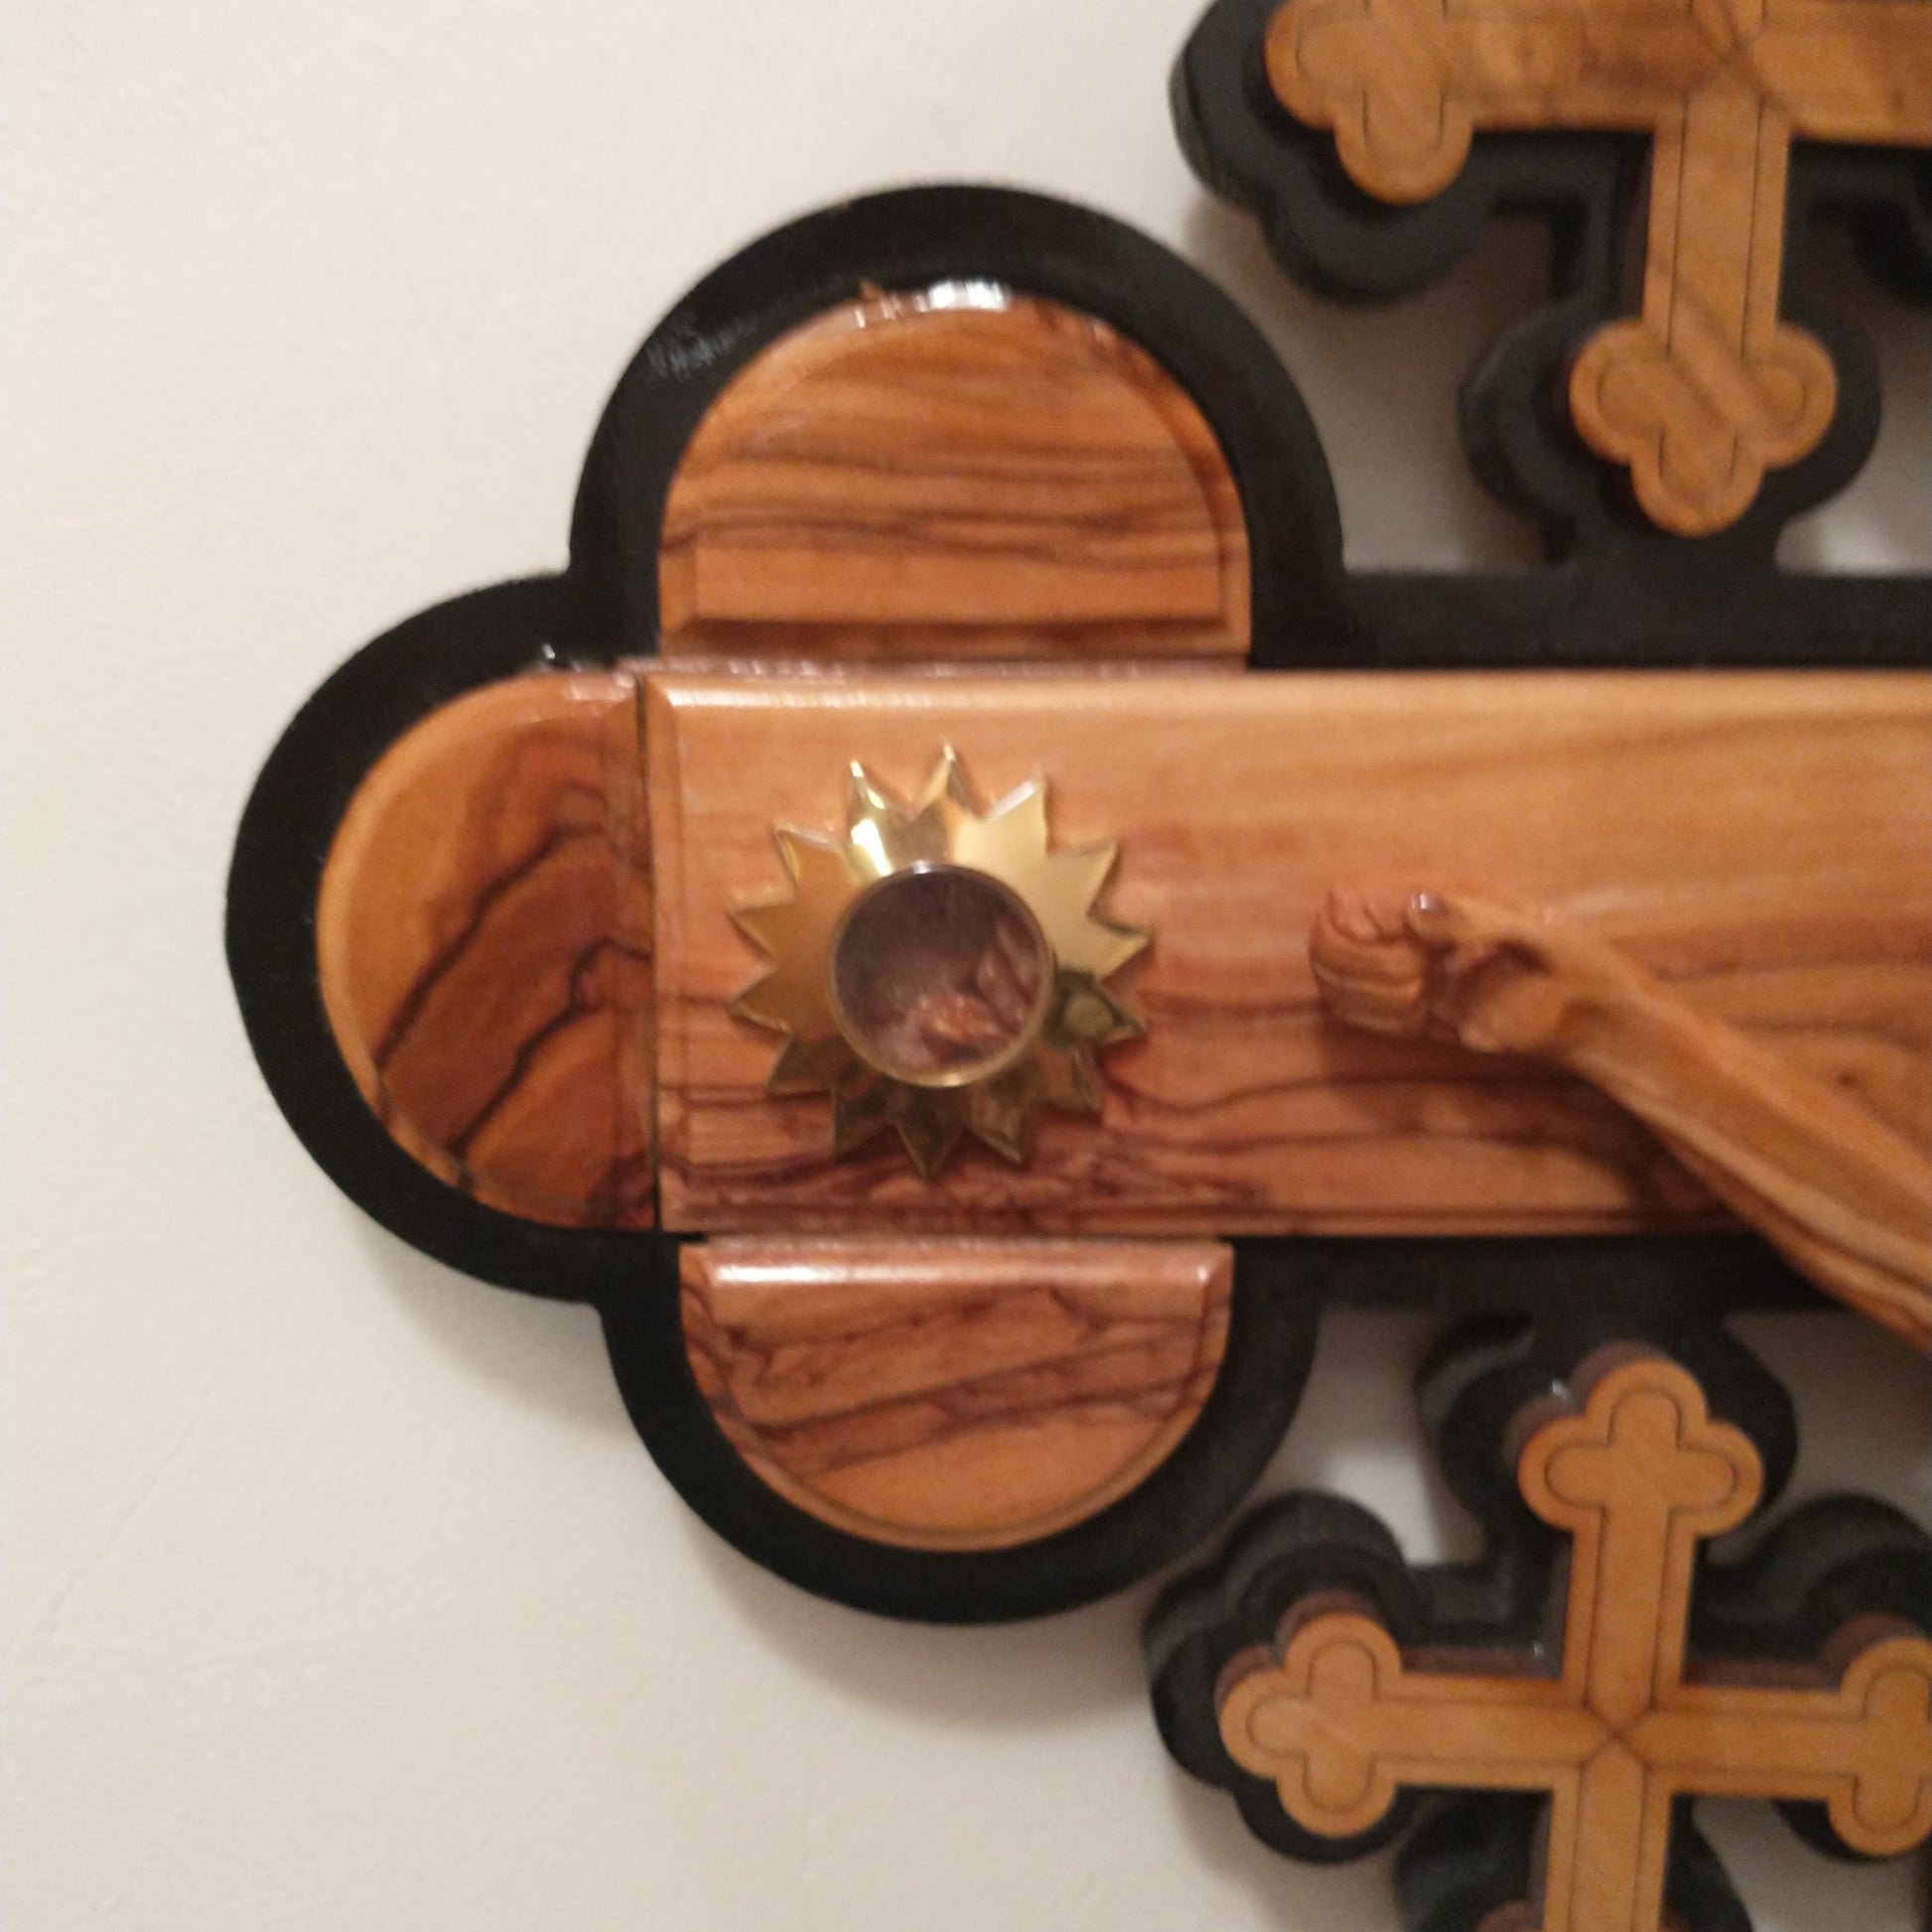 9.7 Celtic Wooden Cross, Hand Made from Holy Land Olive